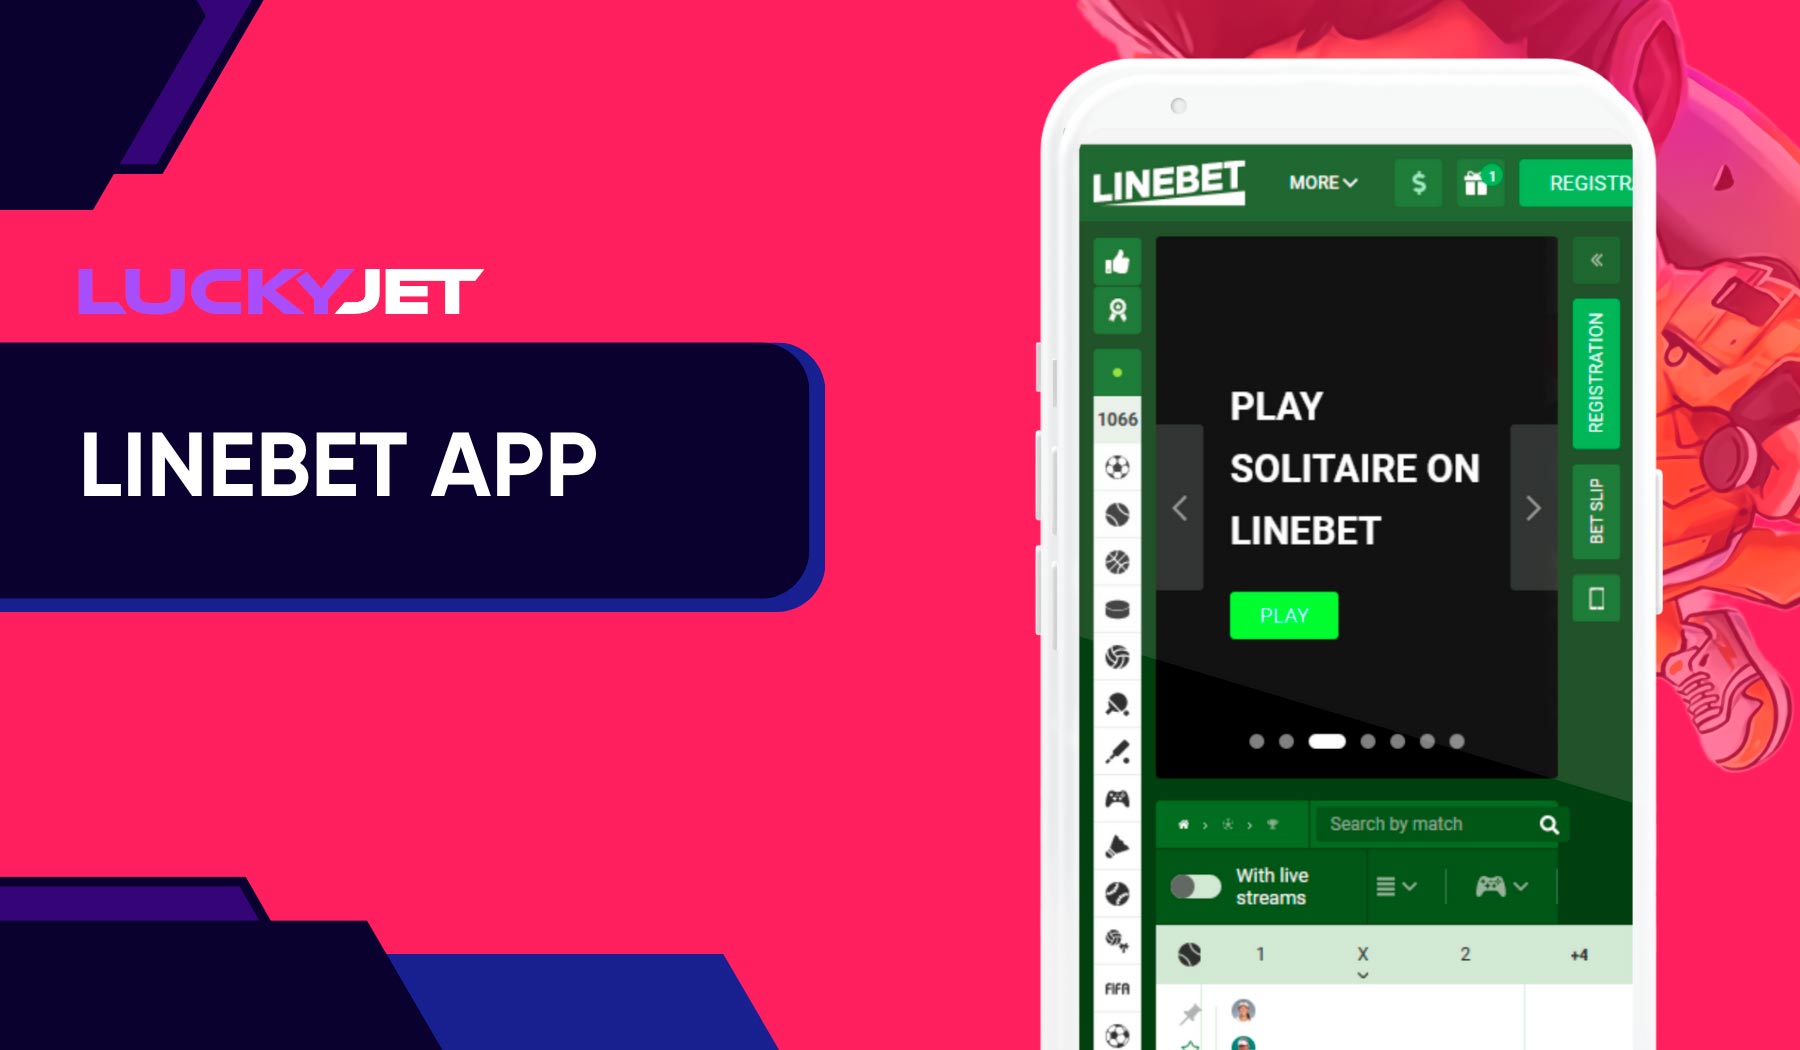 The Linebet mobile app